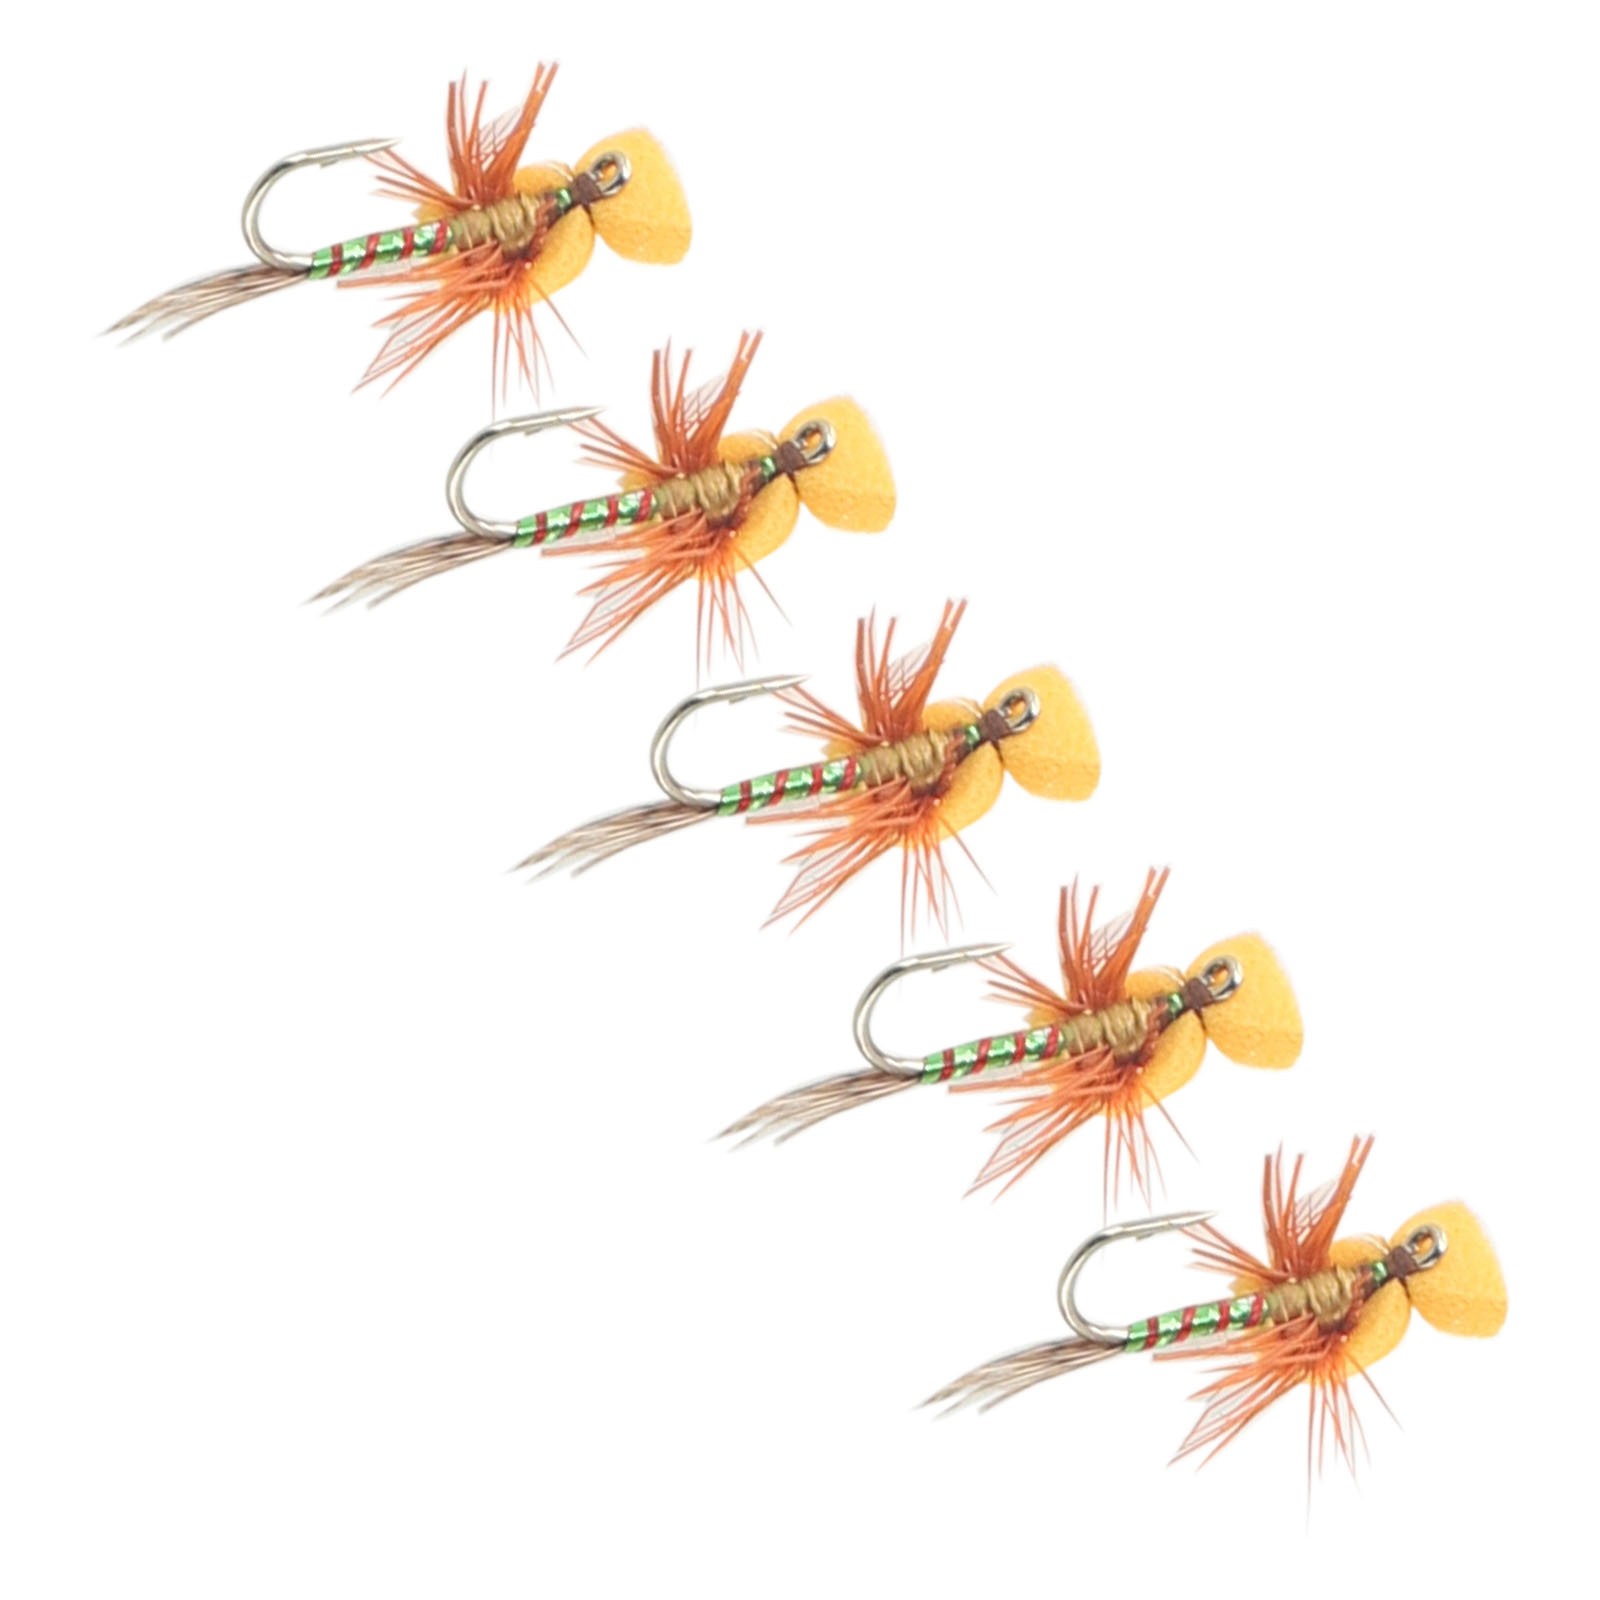 Proven Fly Fishing Bait for Trout Salmon Bass Catfish 5 Pack Dry